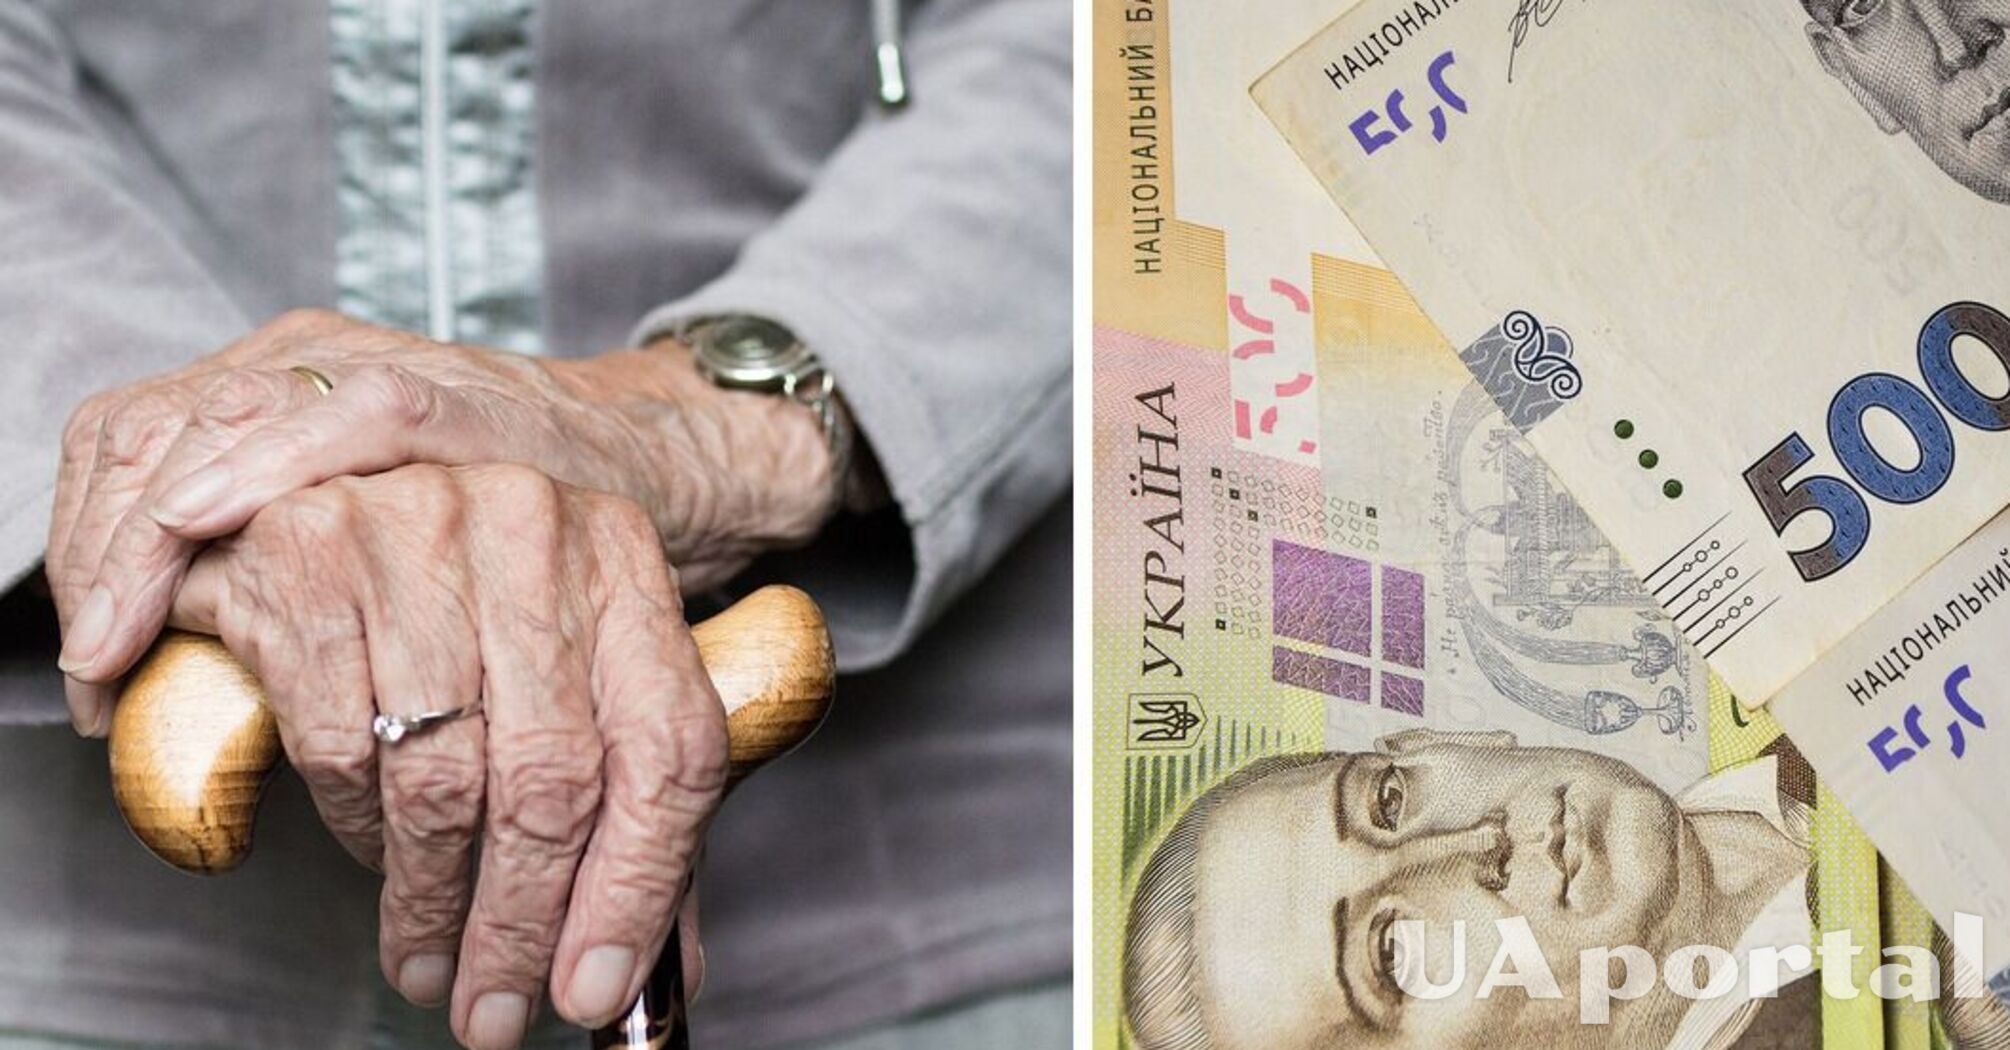 In May, some pensioners will not receive payments: what is the reason